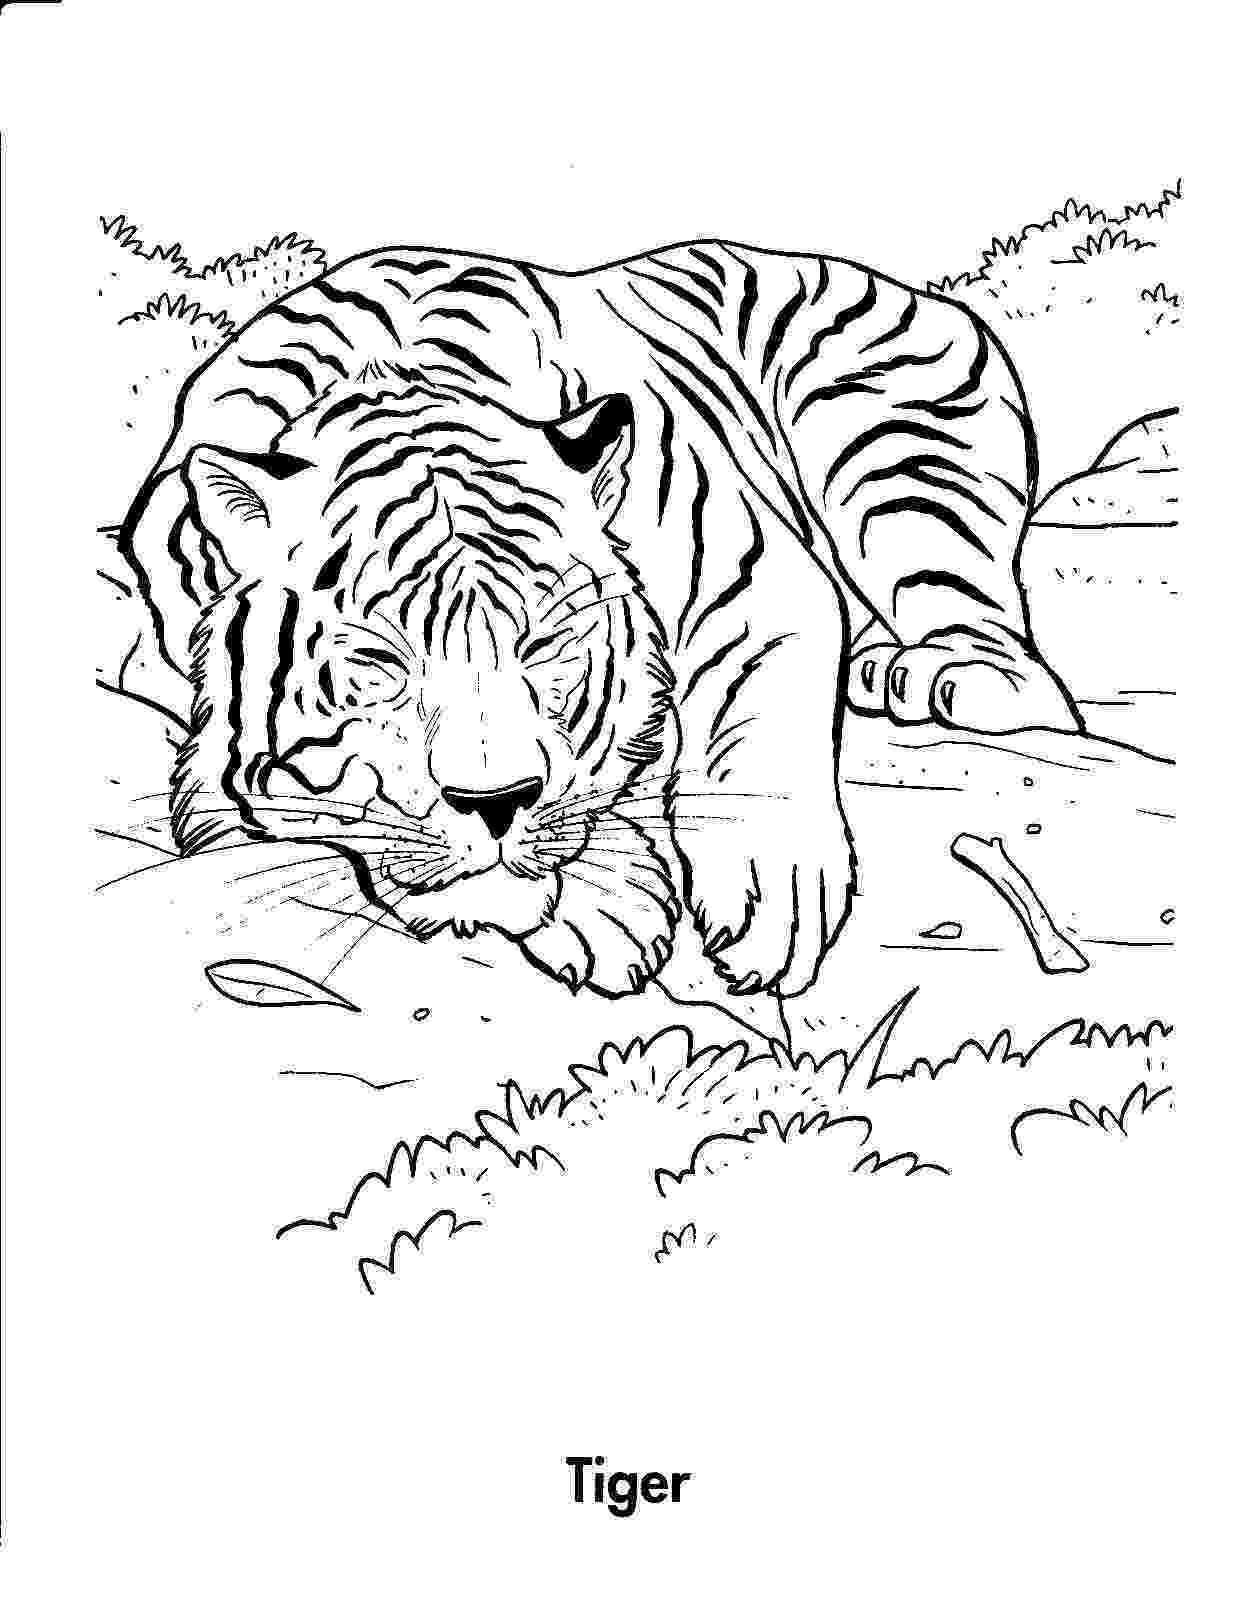 tiger colouring pictures free printable tiger coloring pages for kids tiger colouring pictures 1 1